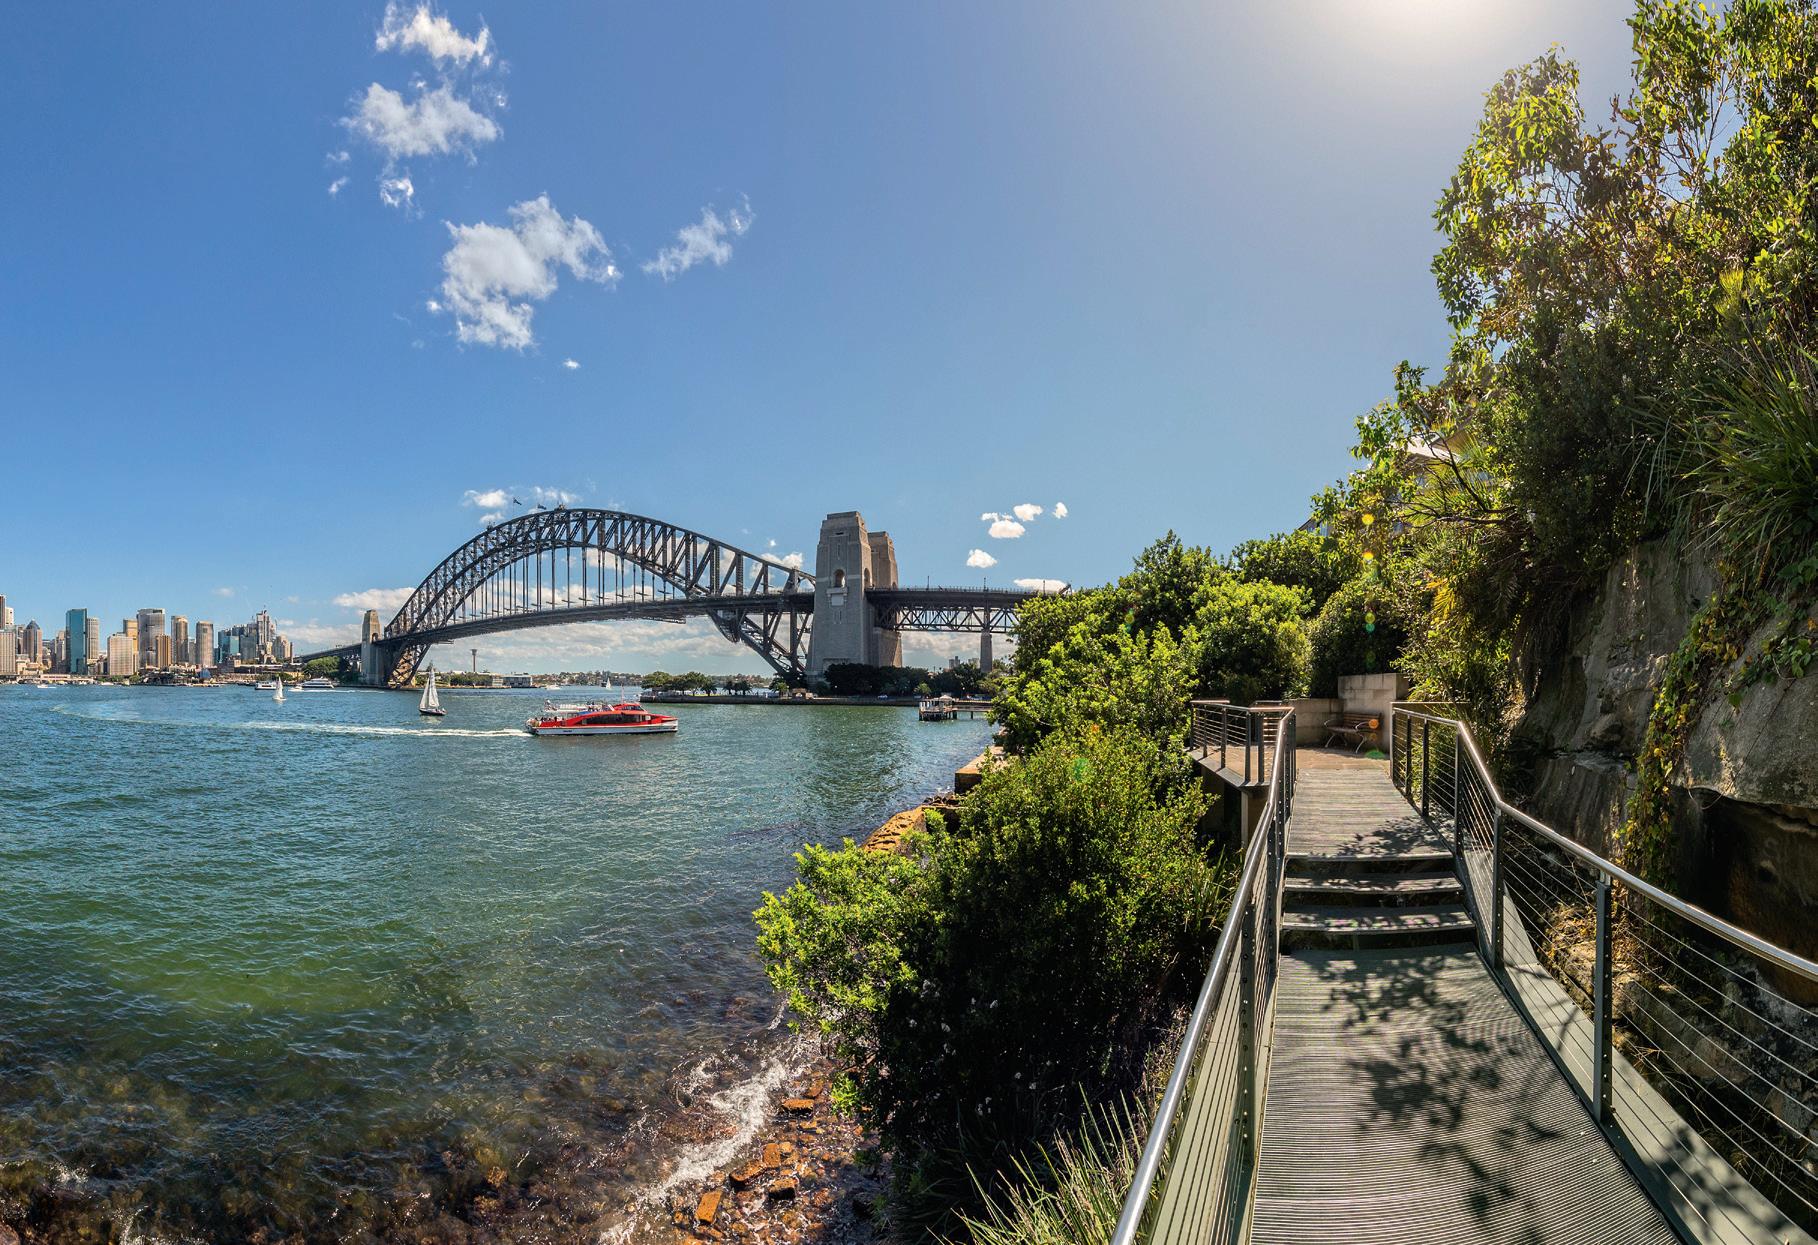 Capturing the Timeless Beauty of the Sydney Harbor Bridge: A Photographer’s Guide